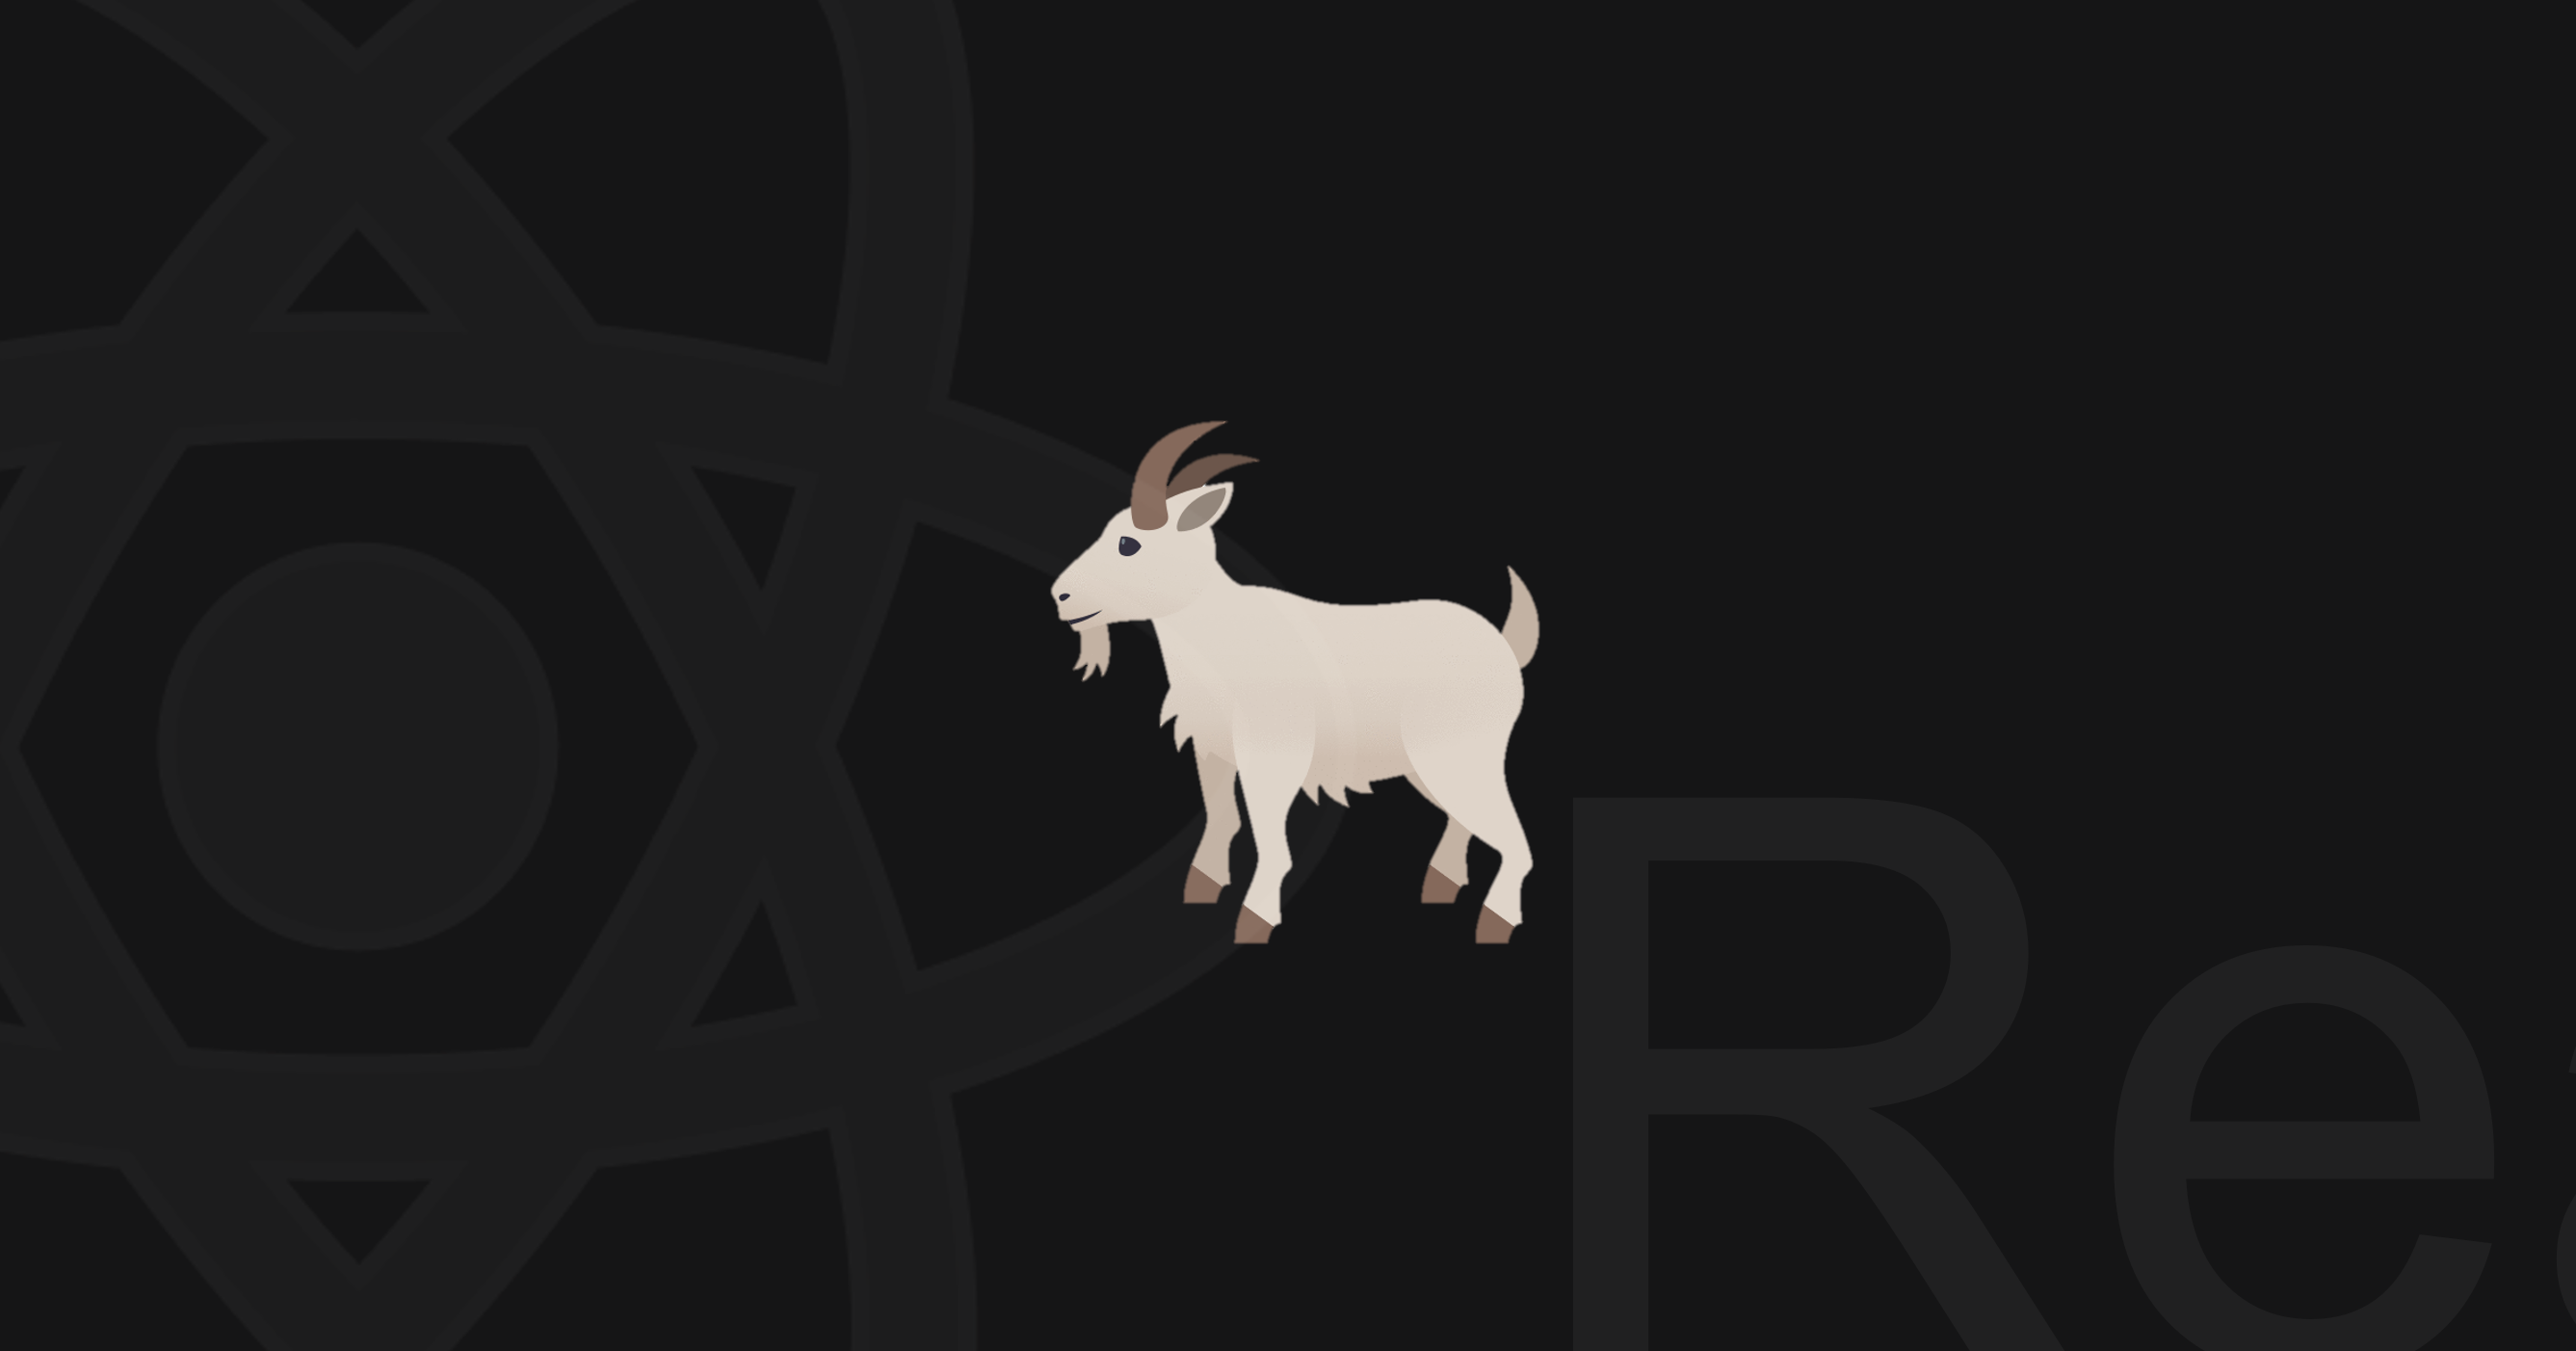 Image of a goat on a black background